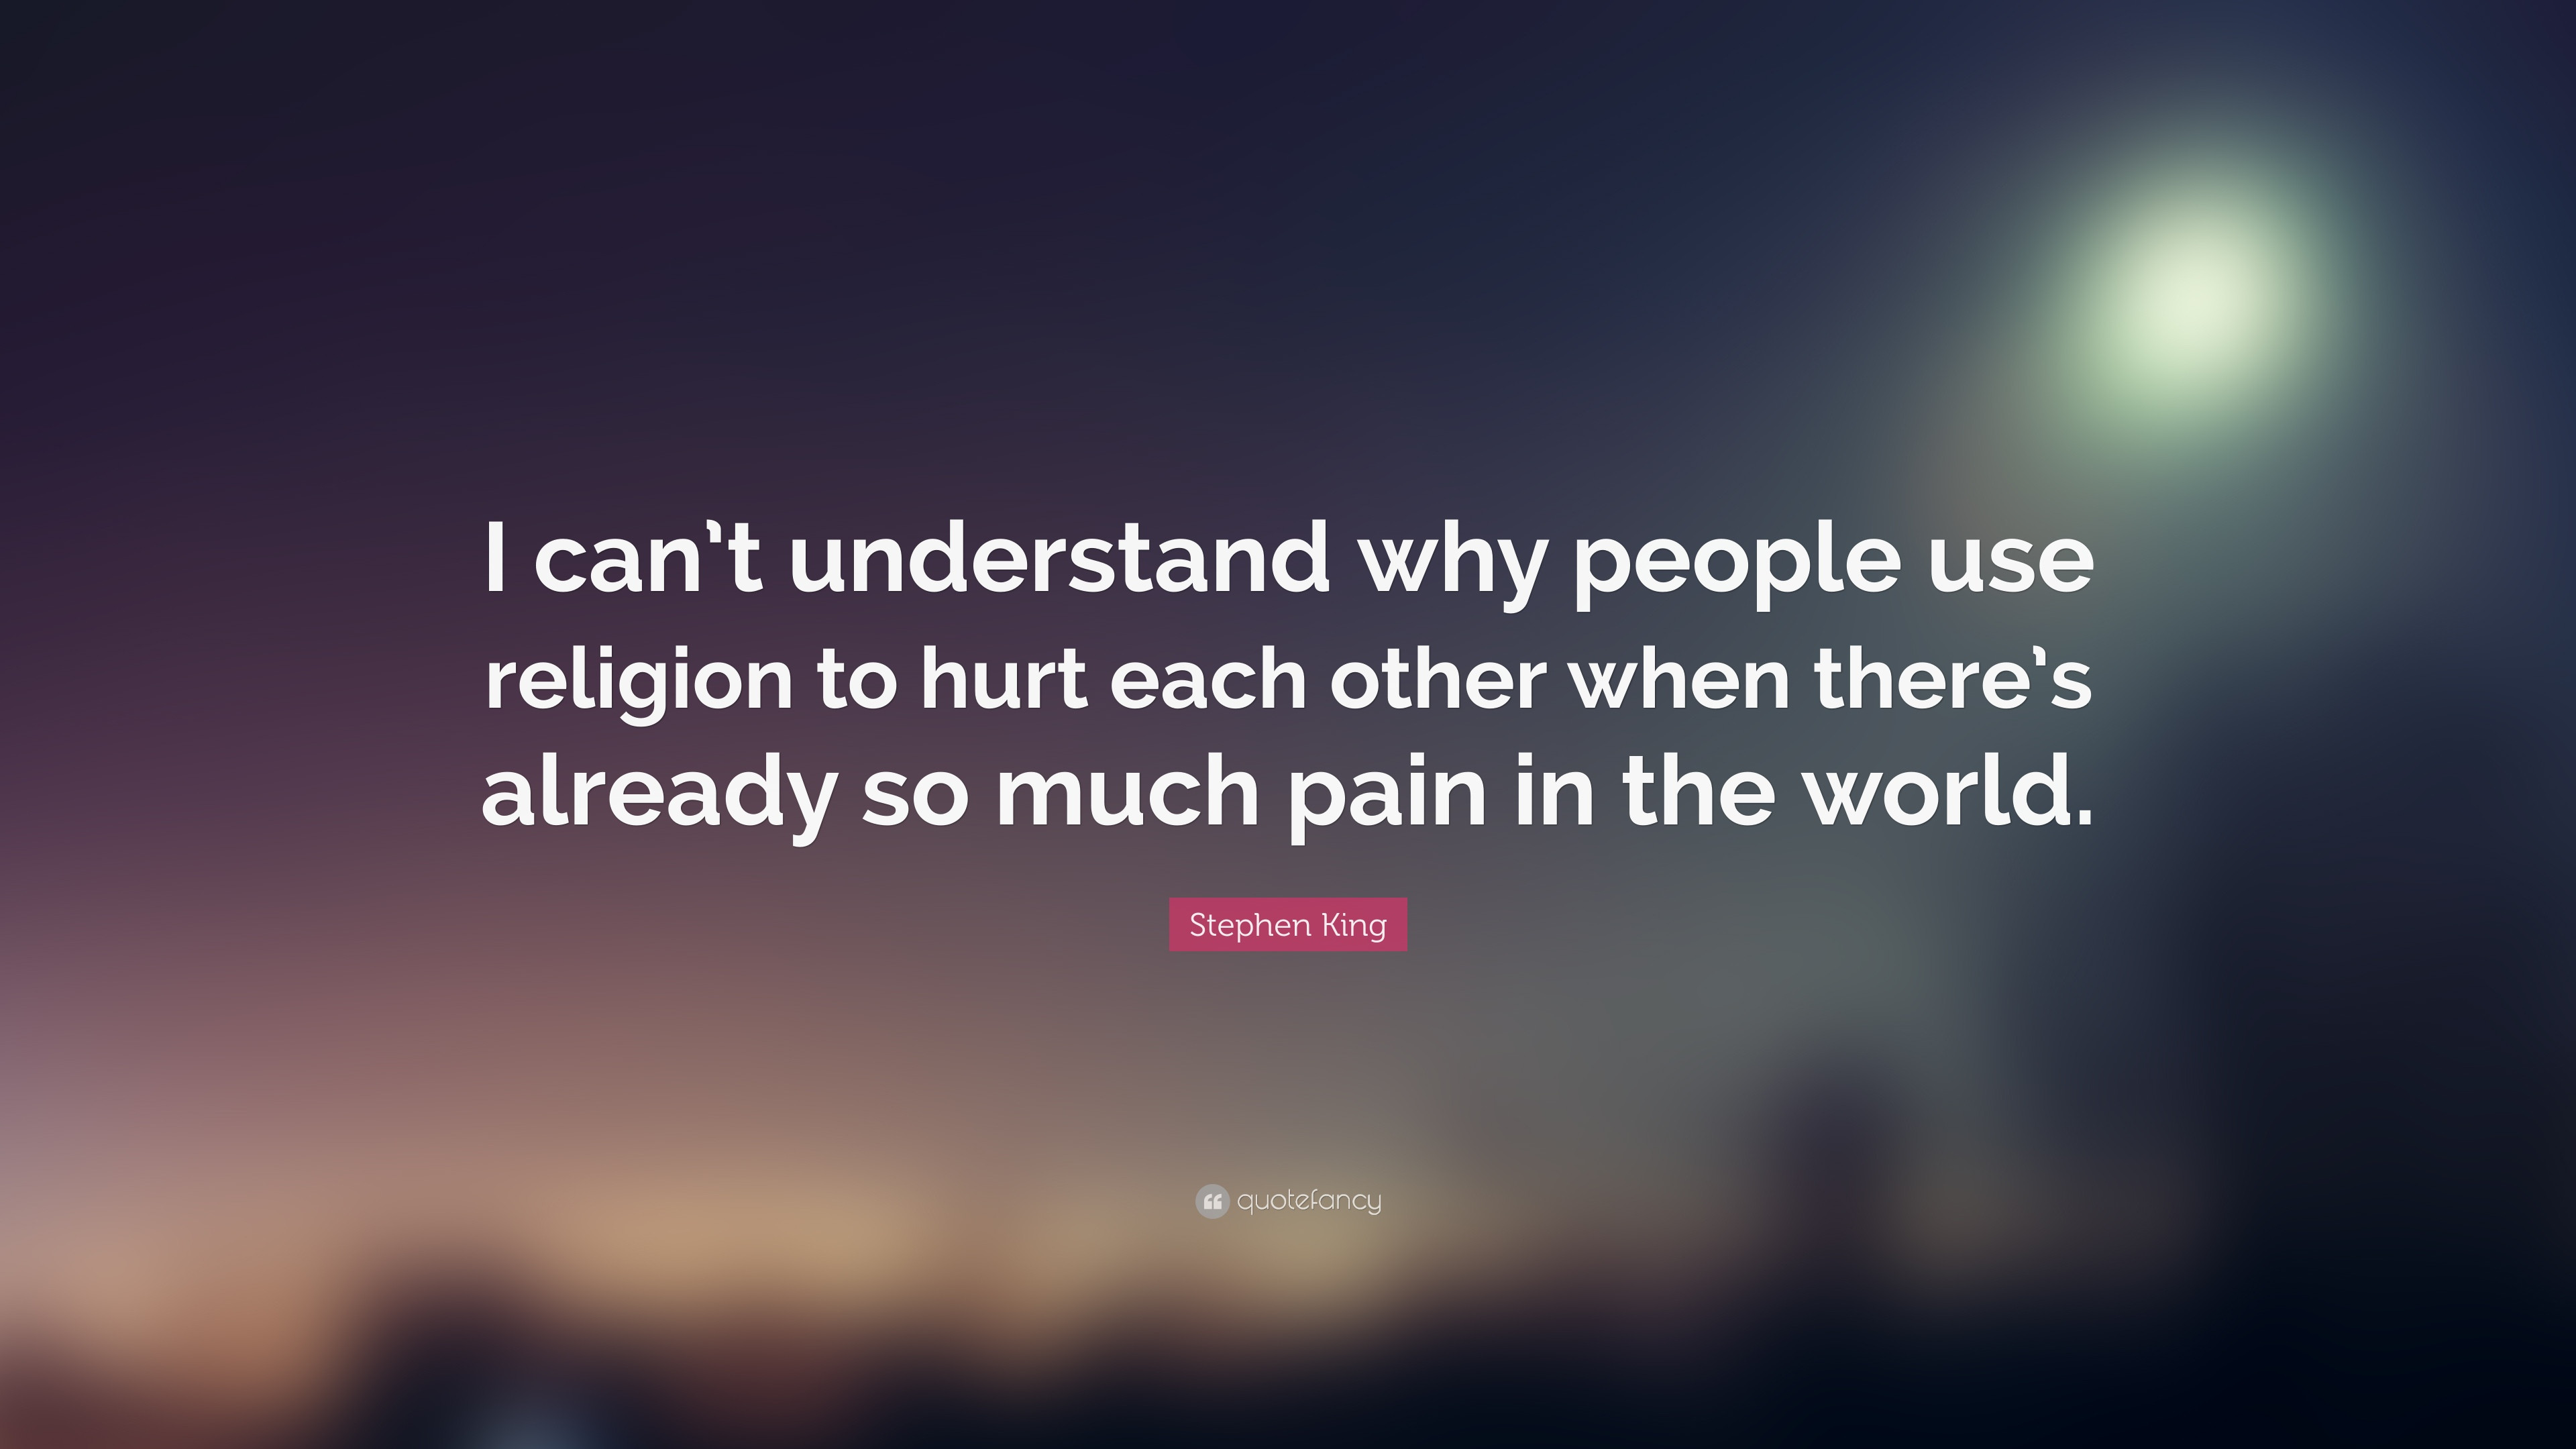 3840x2160 ... Quotes About Love Hurting Each Other Stephen King Quote “I Can't  Understand Why ...